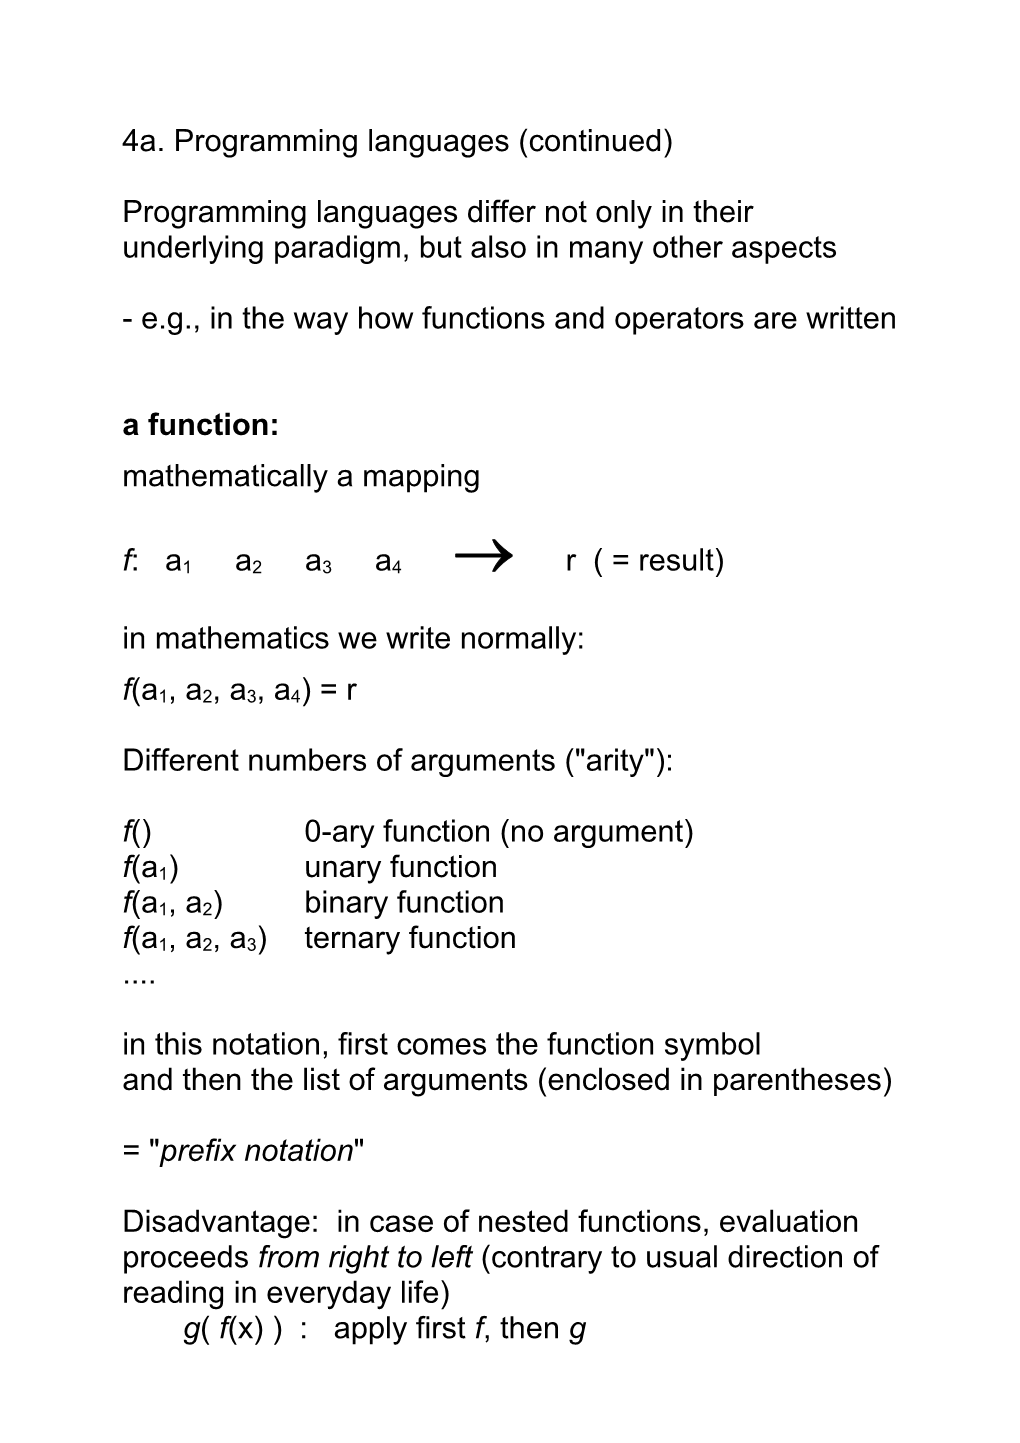 E.G., in the Way How Functions and Operators Are Written